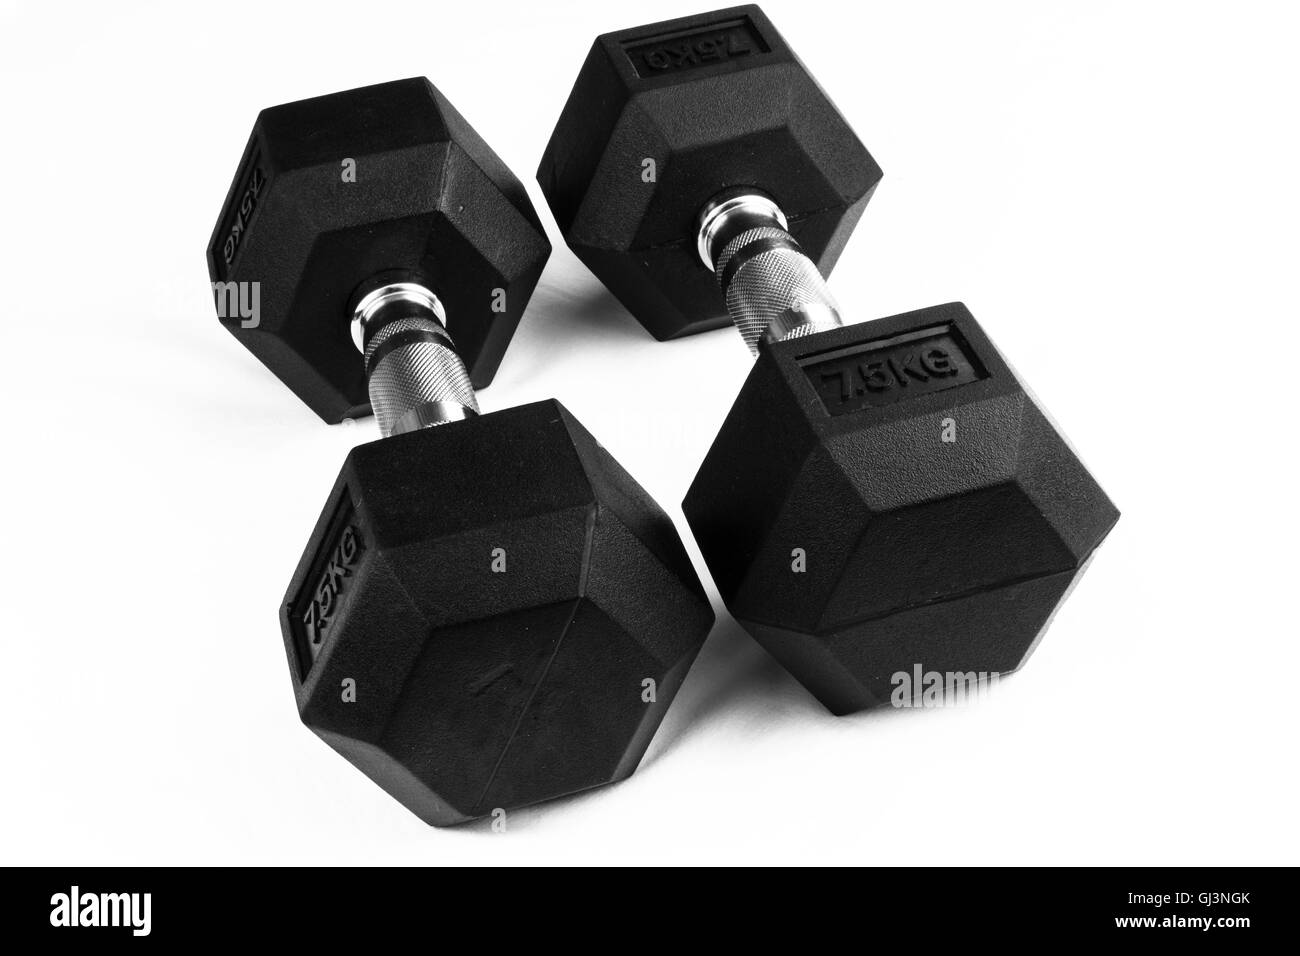 Two 7.5kg dumb-bells black with chrome handles on white background Stock Photo